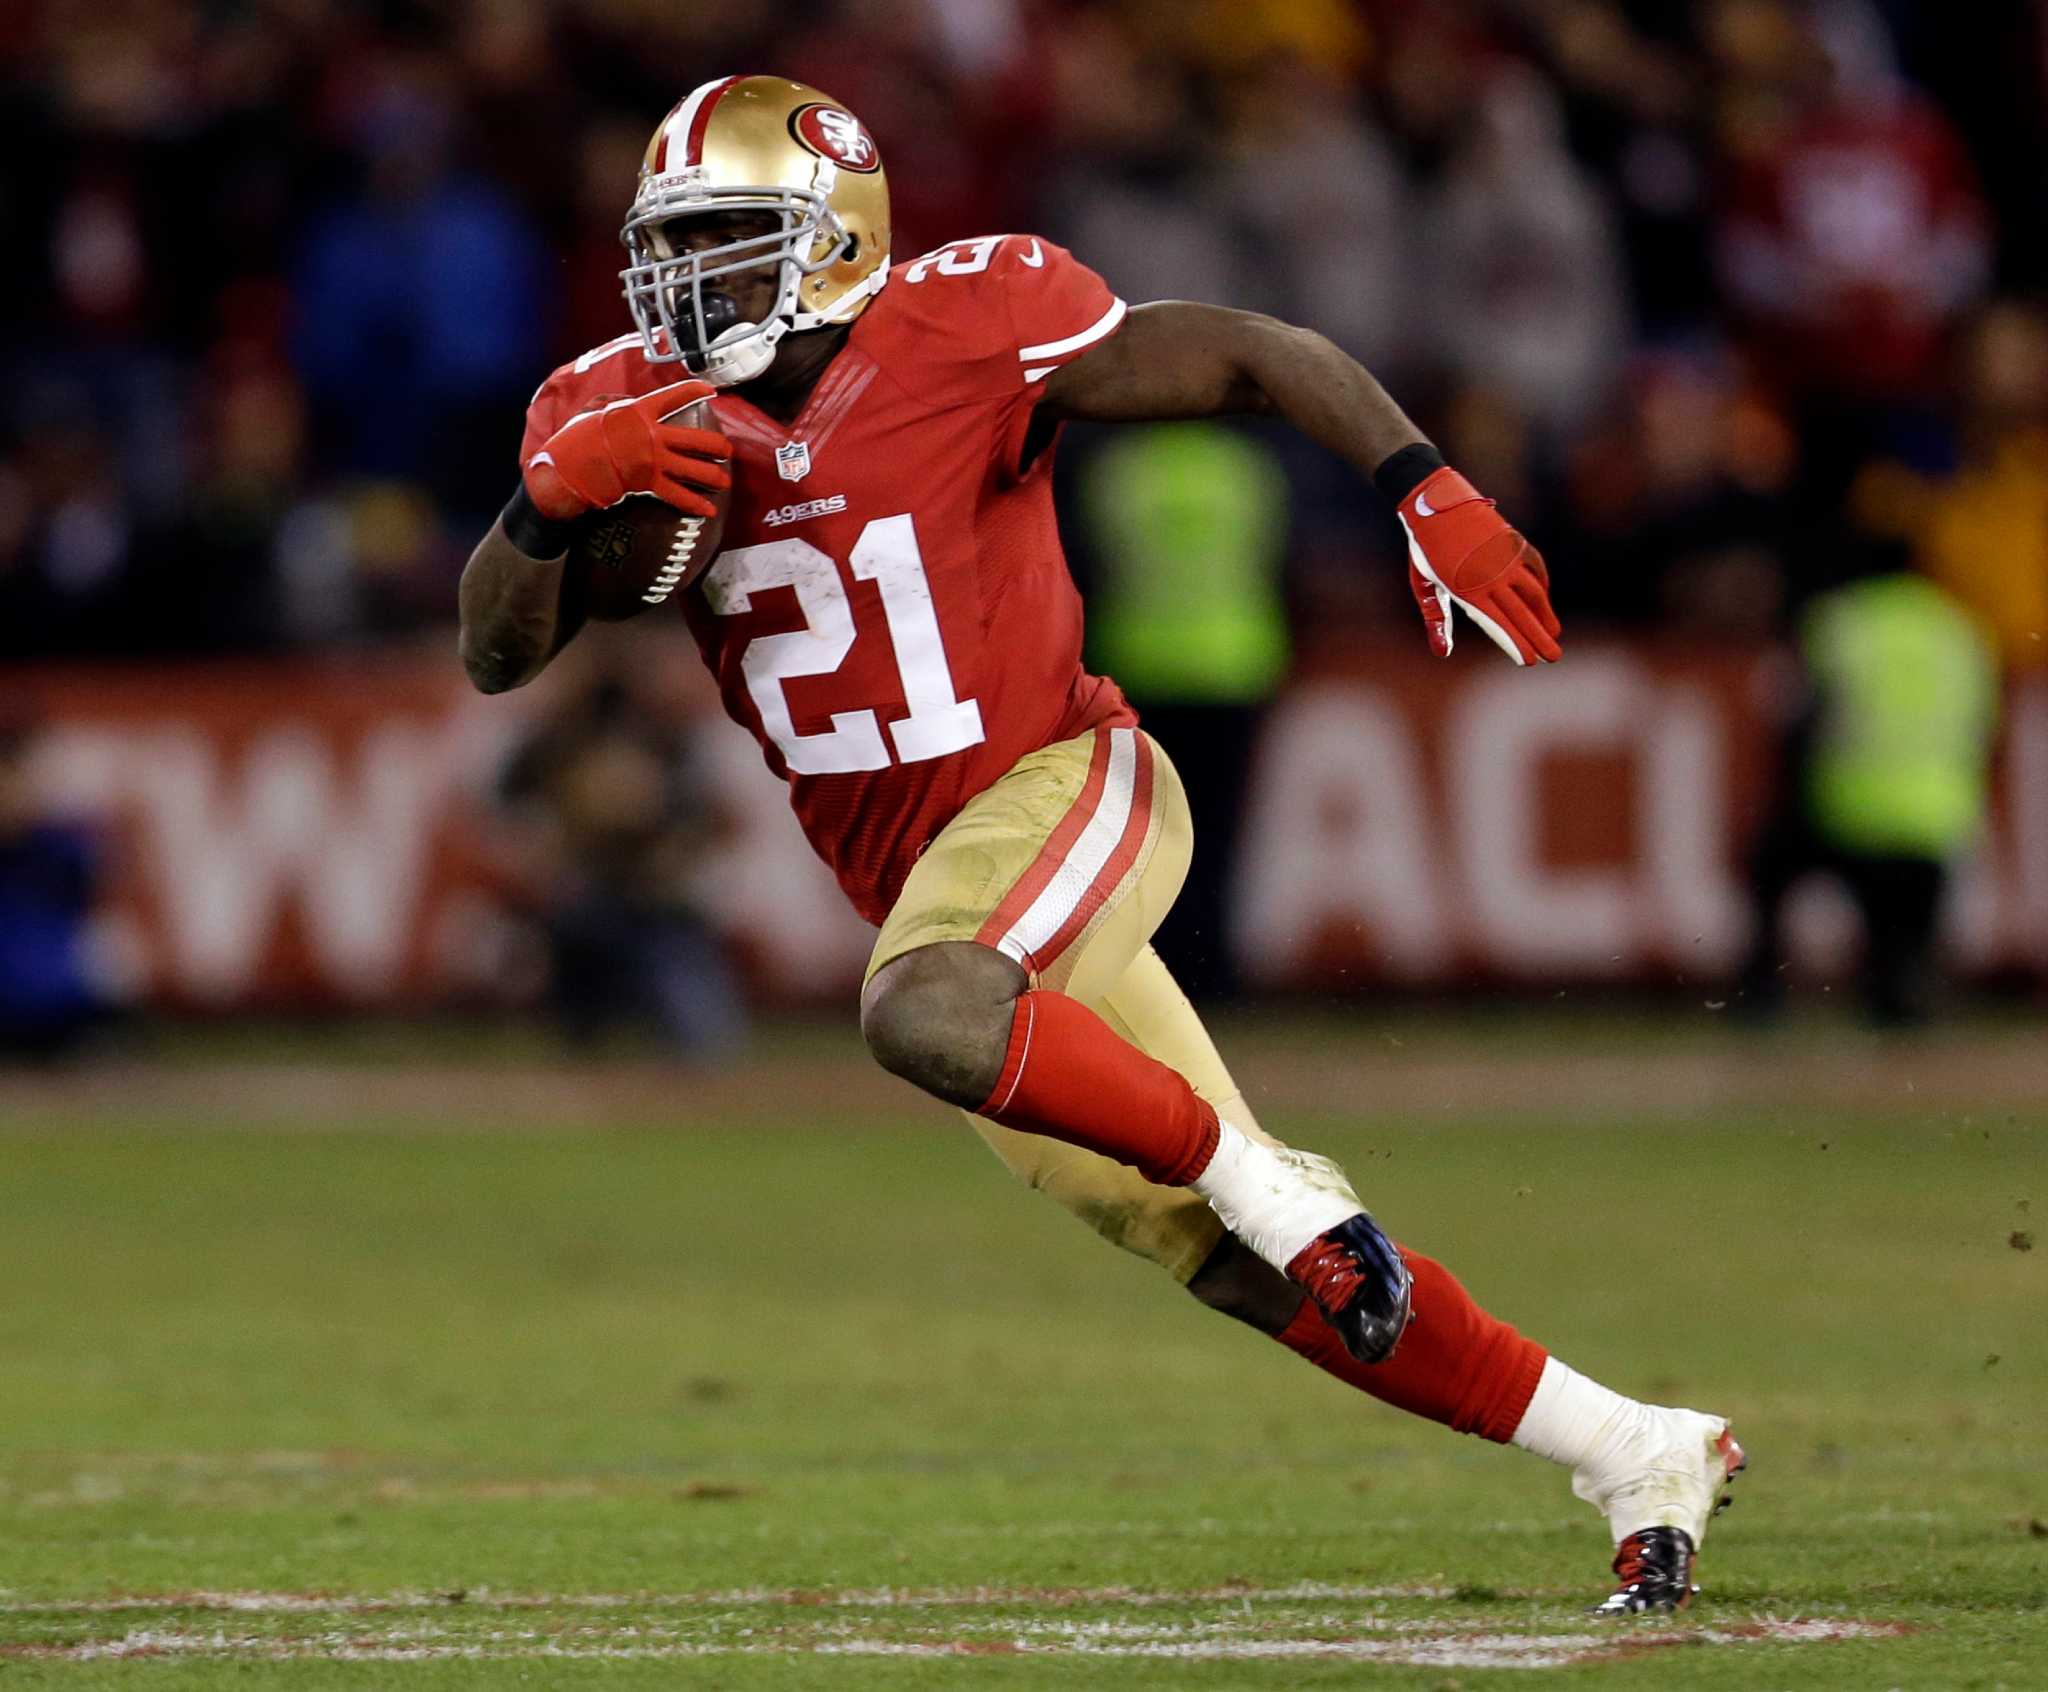 Frank Gore, Joe Staley offer to buy 49ers fans tickets to NFC